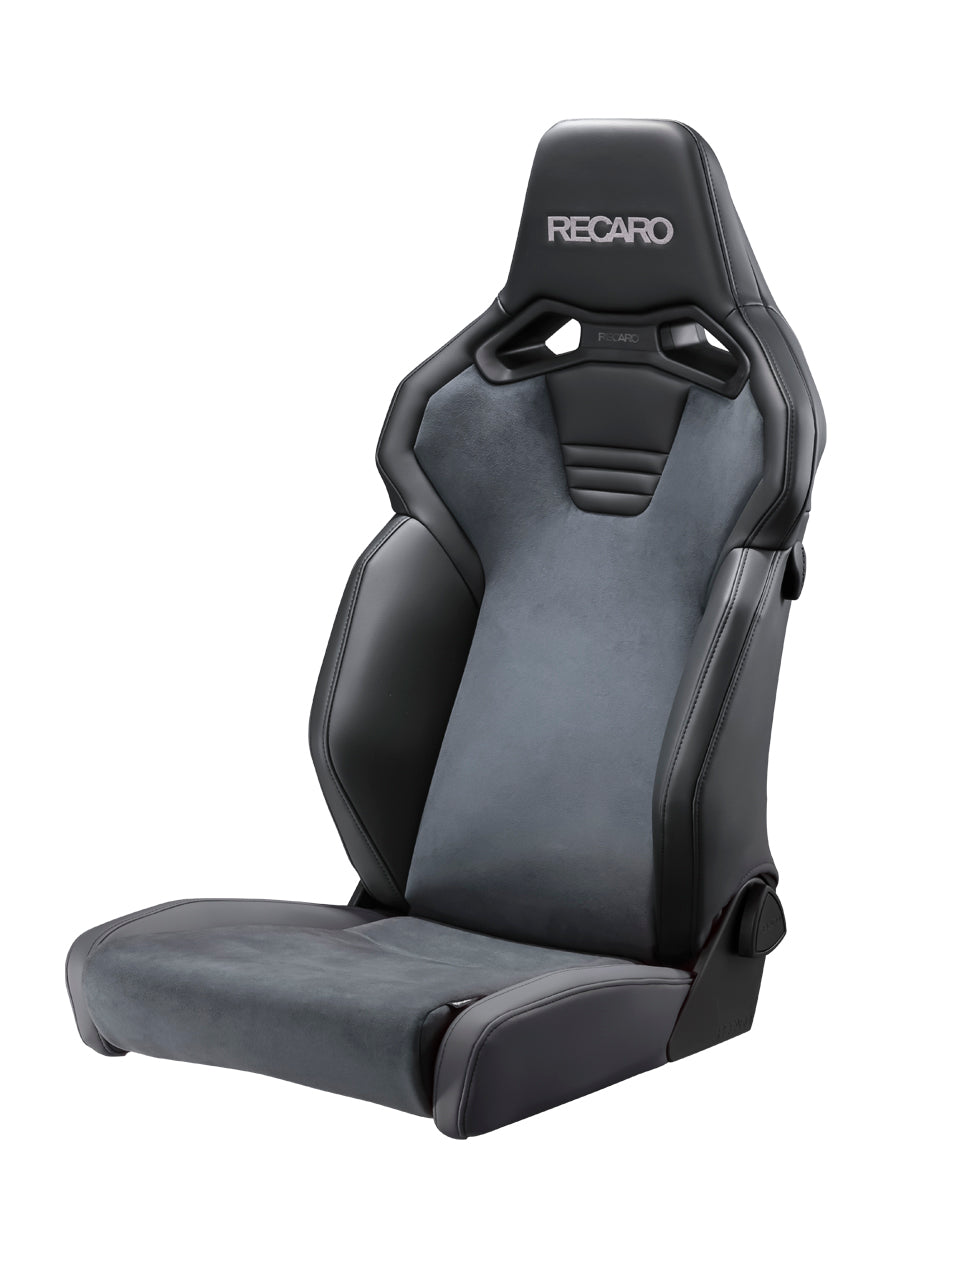 RECARO SR-C UT100 A R CG BK ARTIFICIAL LEATHER BLACK COLOR AND ULTRA SUEDE CHARCOAL GRAY COLOR SEAT ARMREST ATTACHEBLE FOR  81-121.28.645-0